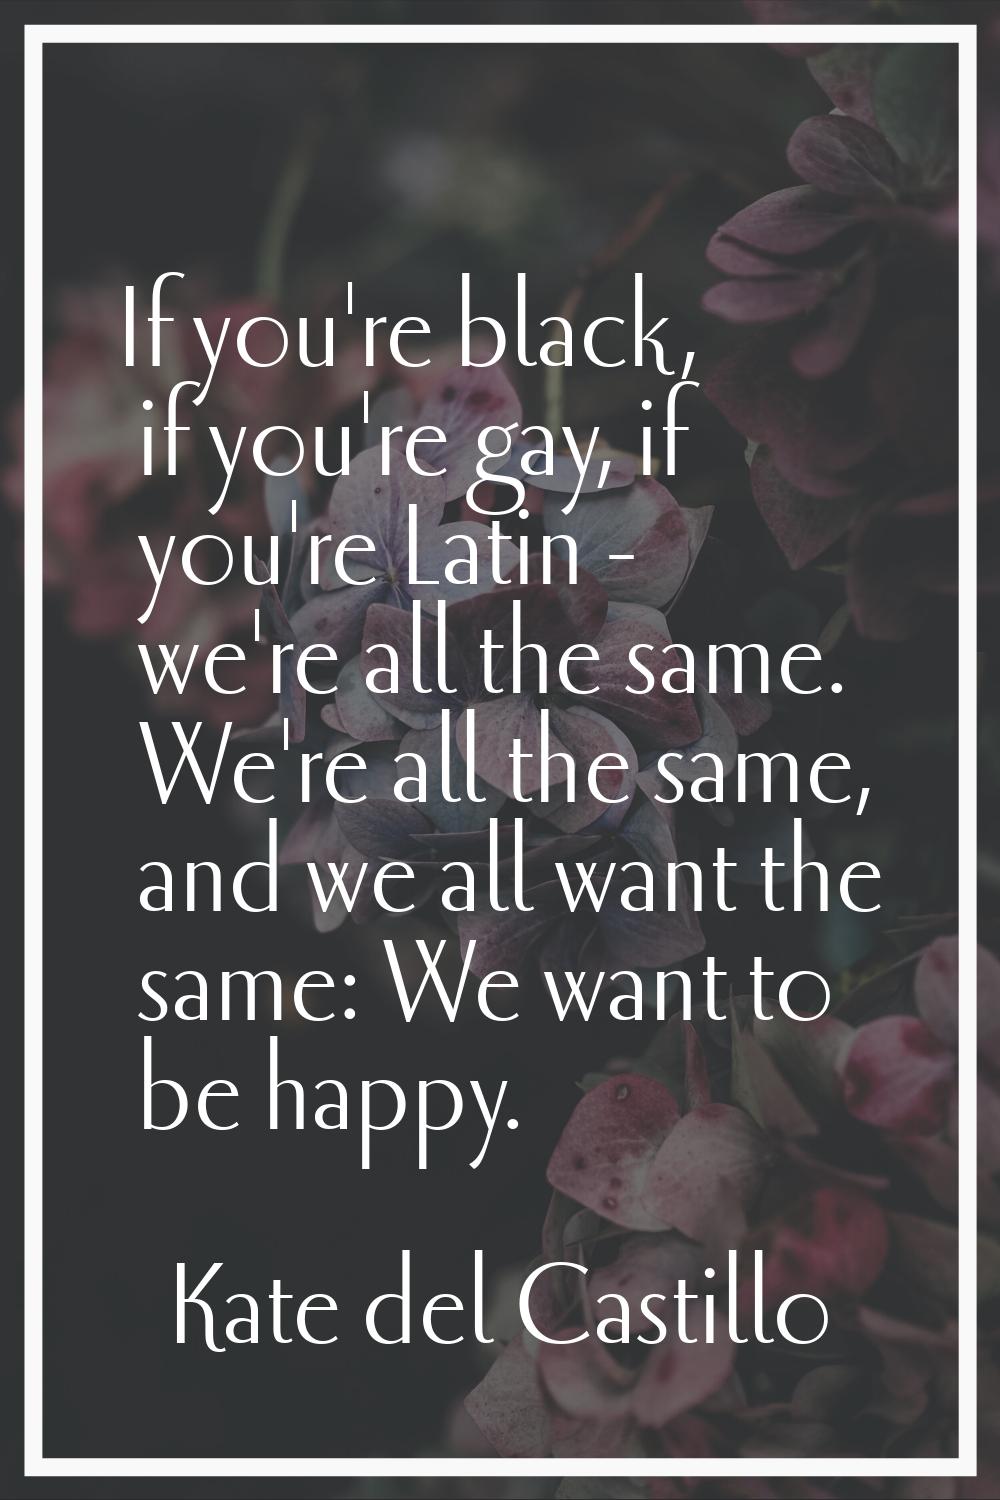 If you're black, if you're gay, if you're Latin - we're all the same. We're all the same, and we al